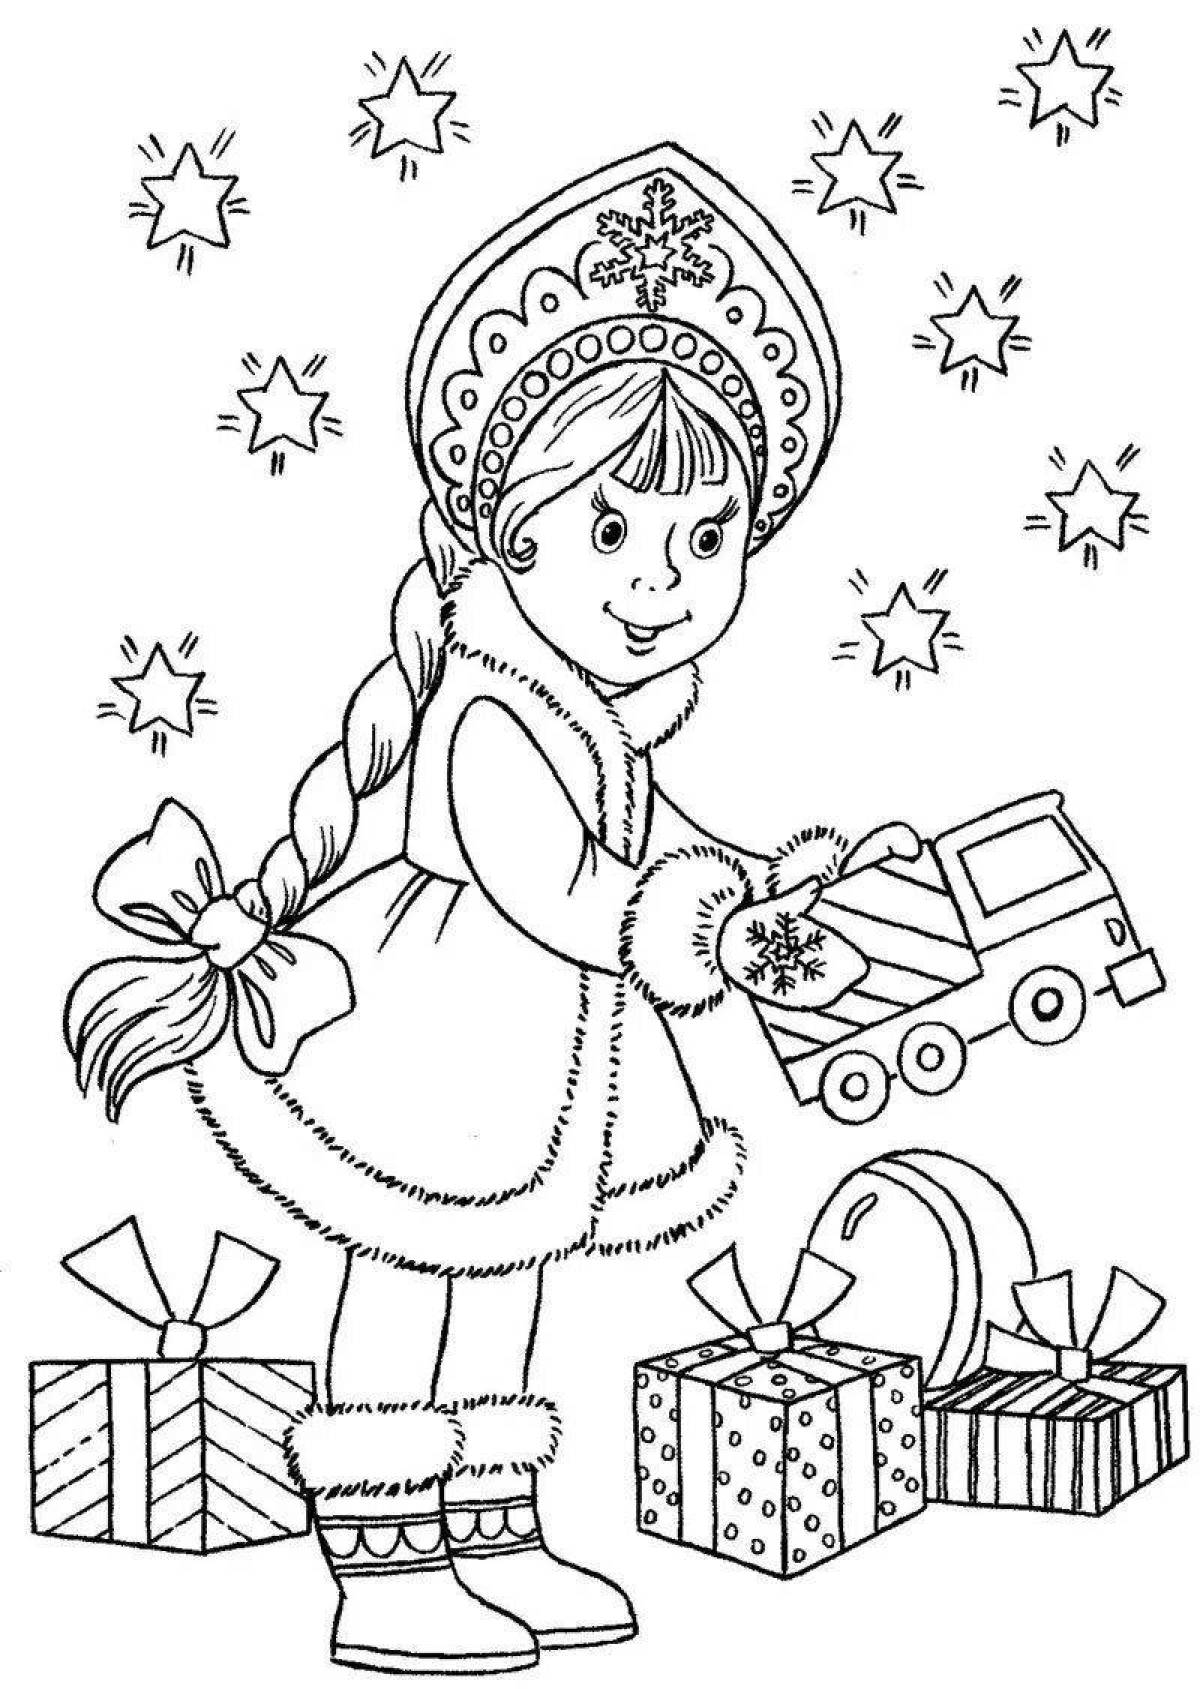 Inviting Christmas coloring pages for girls